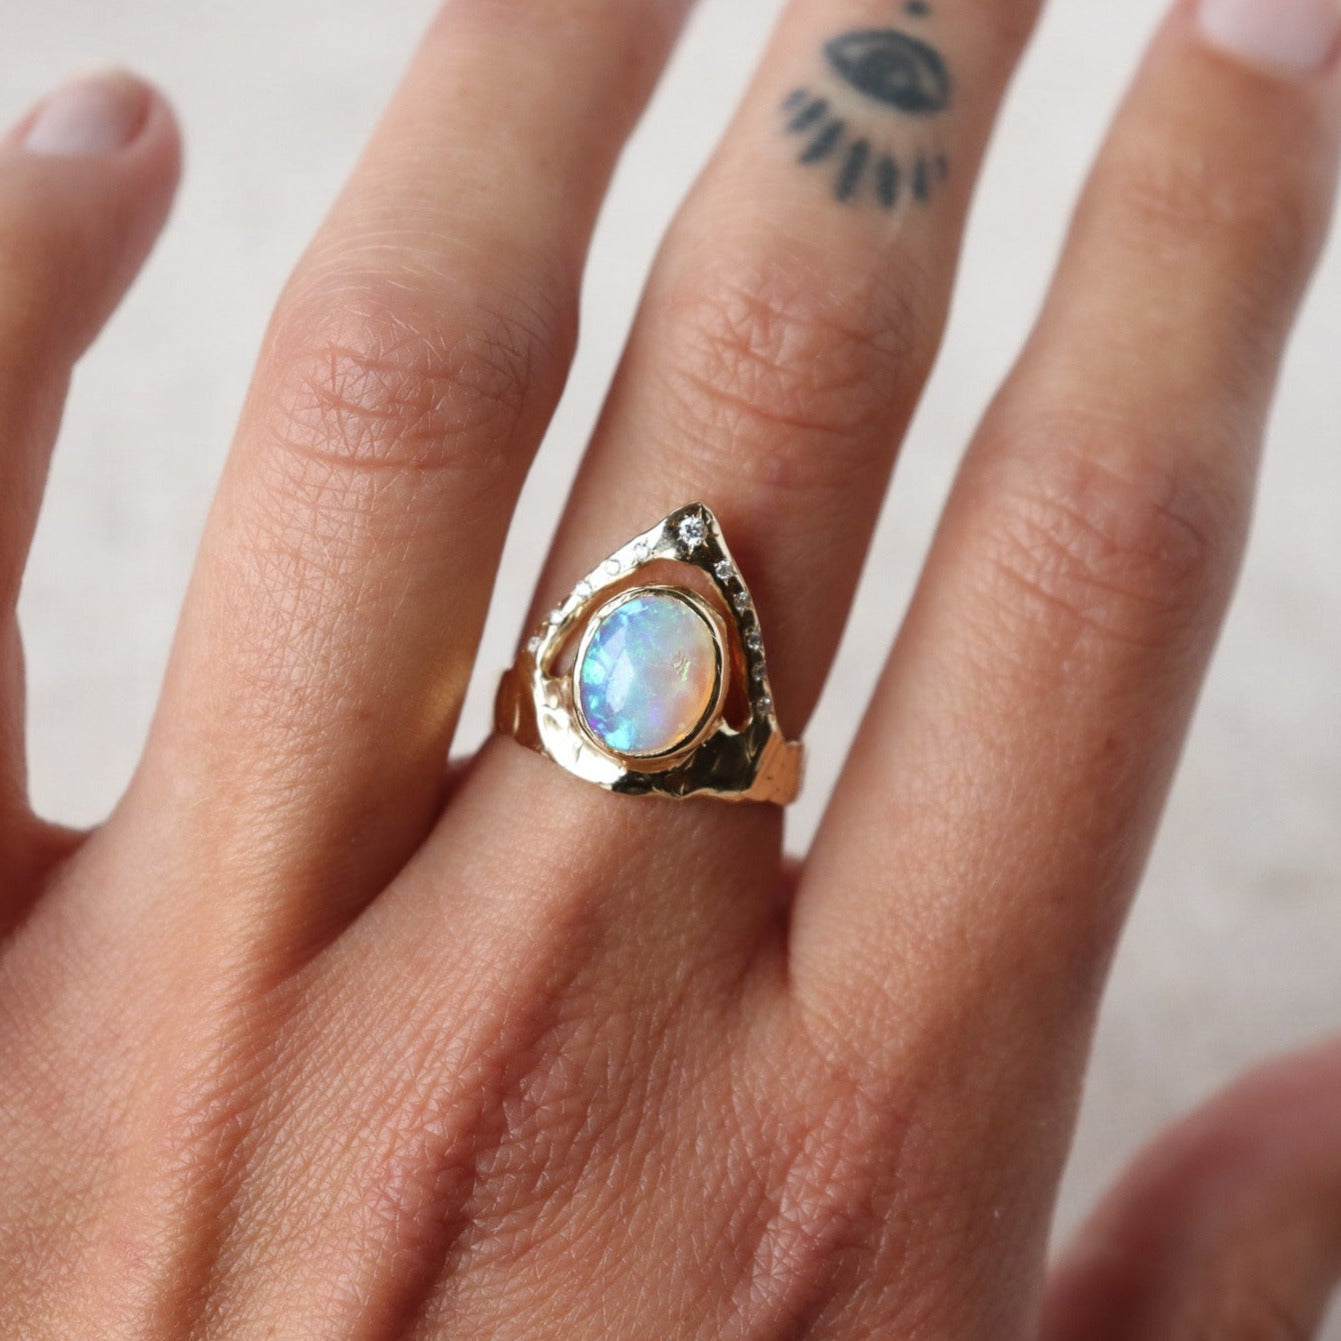 Stunning ring featuring a bezel-set opal on a wide, organically shaped band, adorned with a crown-like V-shaped band encircling the opal and embellished with glistening diamond accents, shown on  a finger for scale.